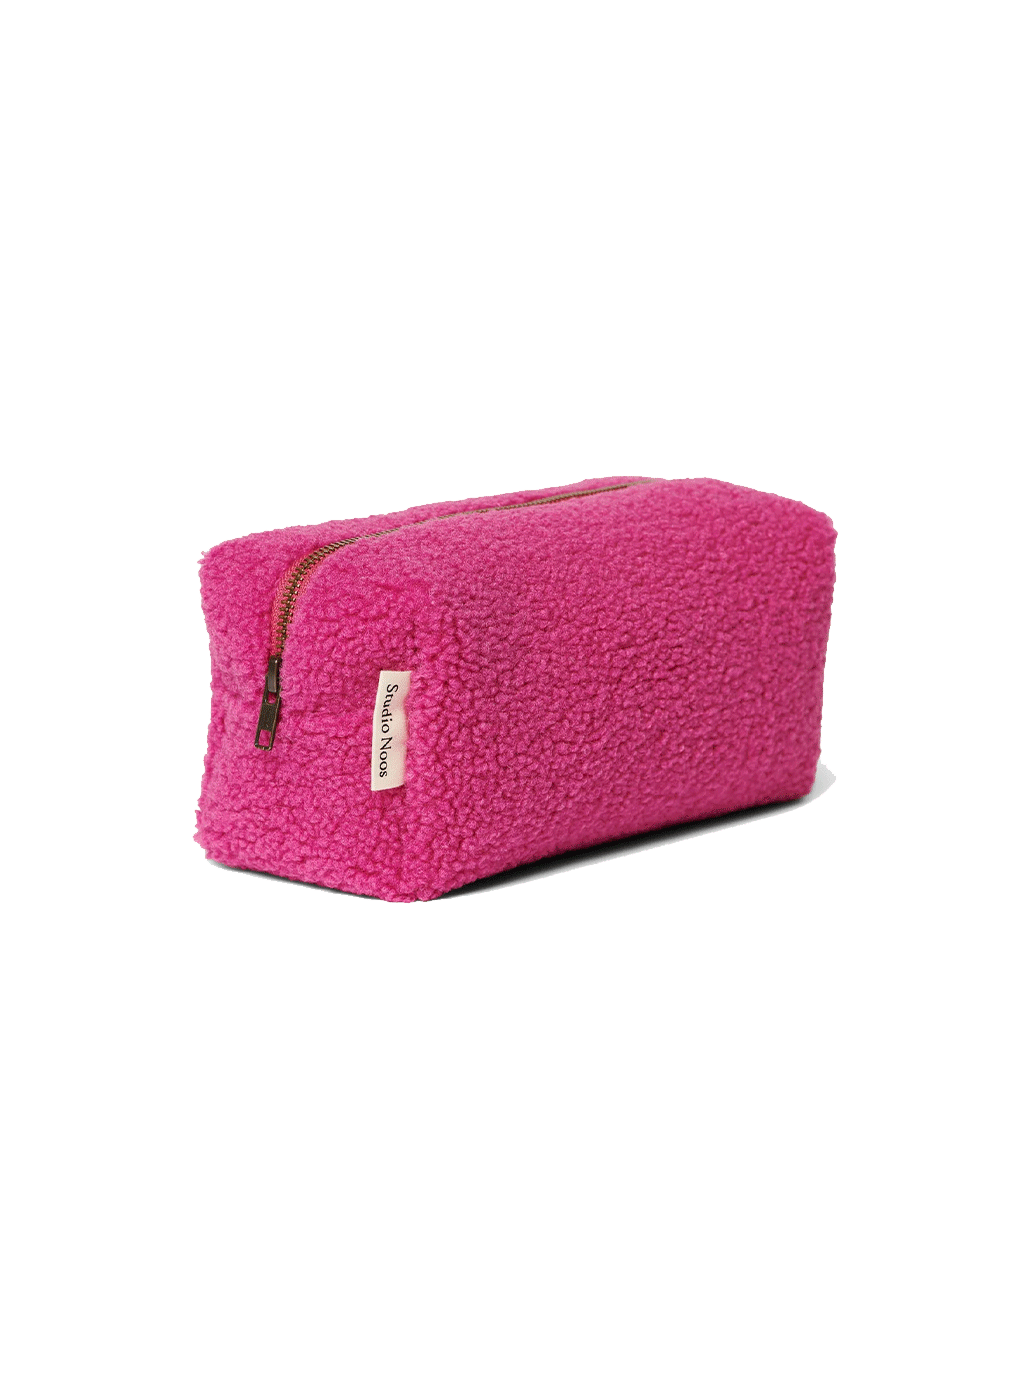 Cosmetic bag / pencil case with a zipper